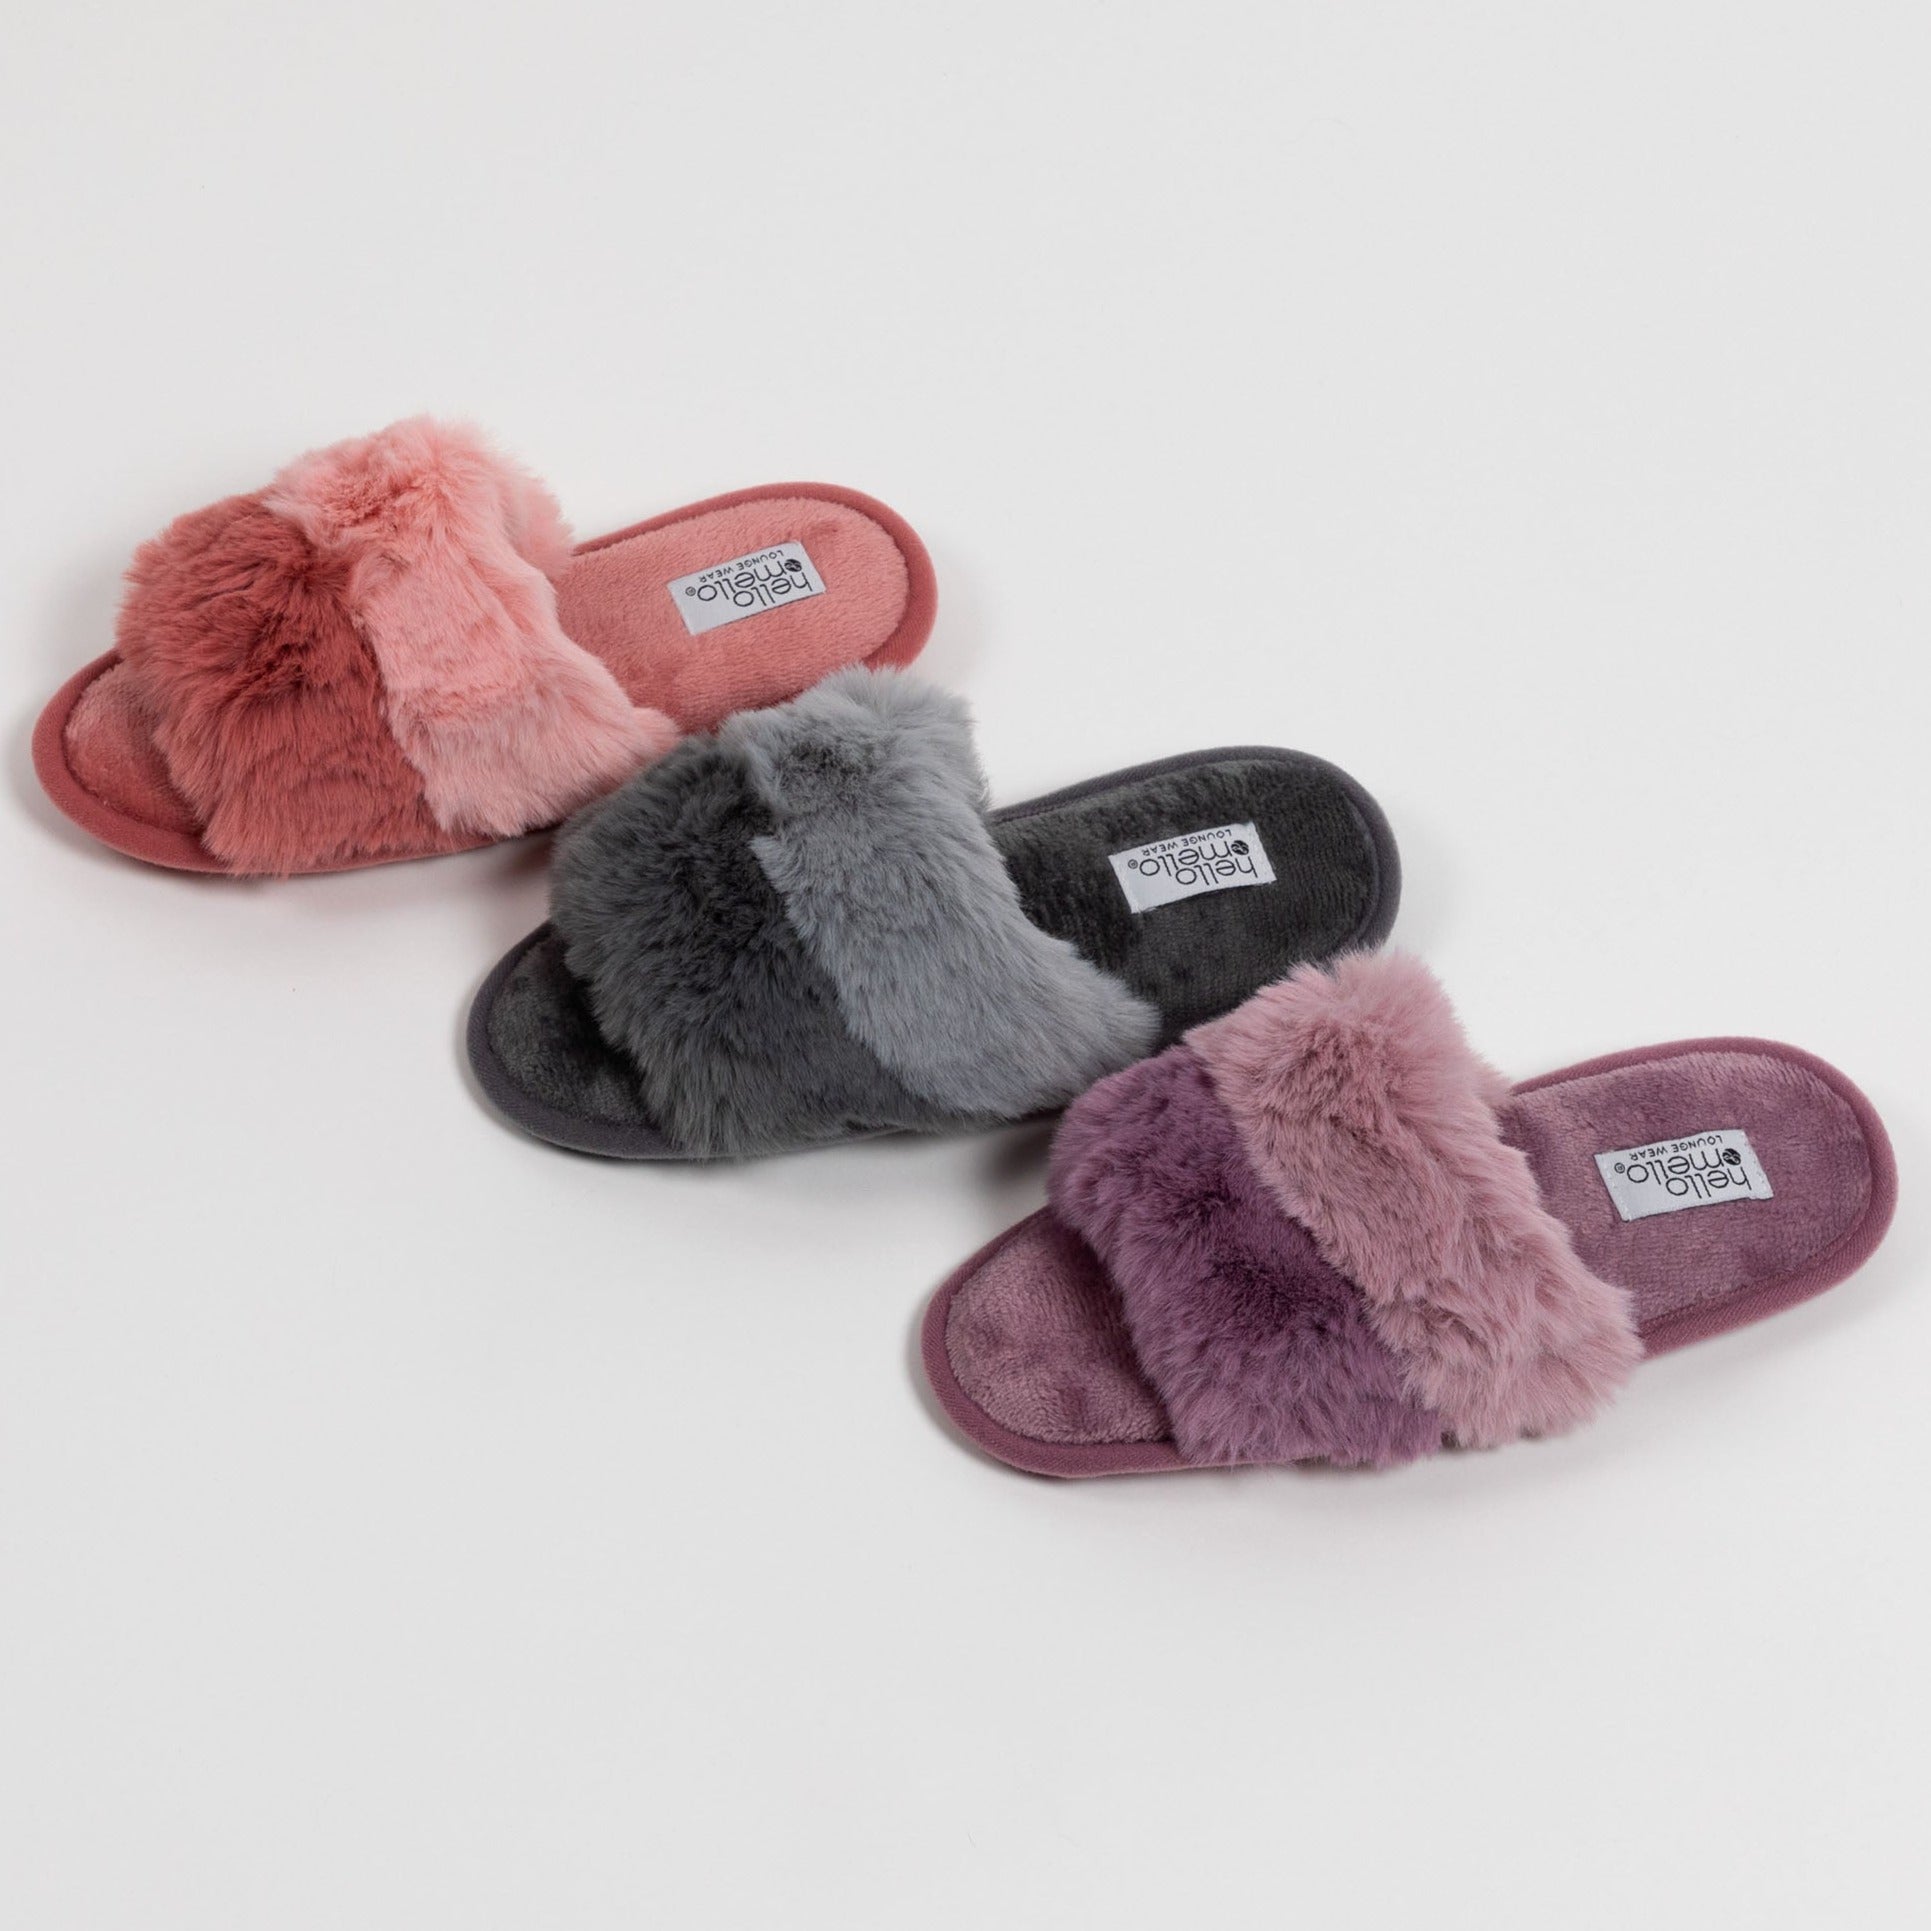 Cotton Candy Puff Slide Slippers - Gray - S/M